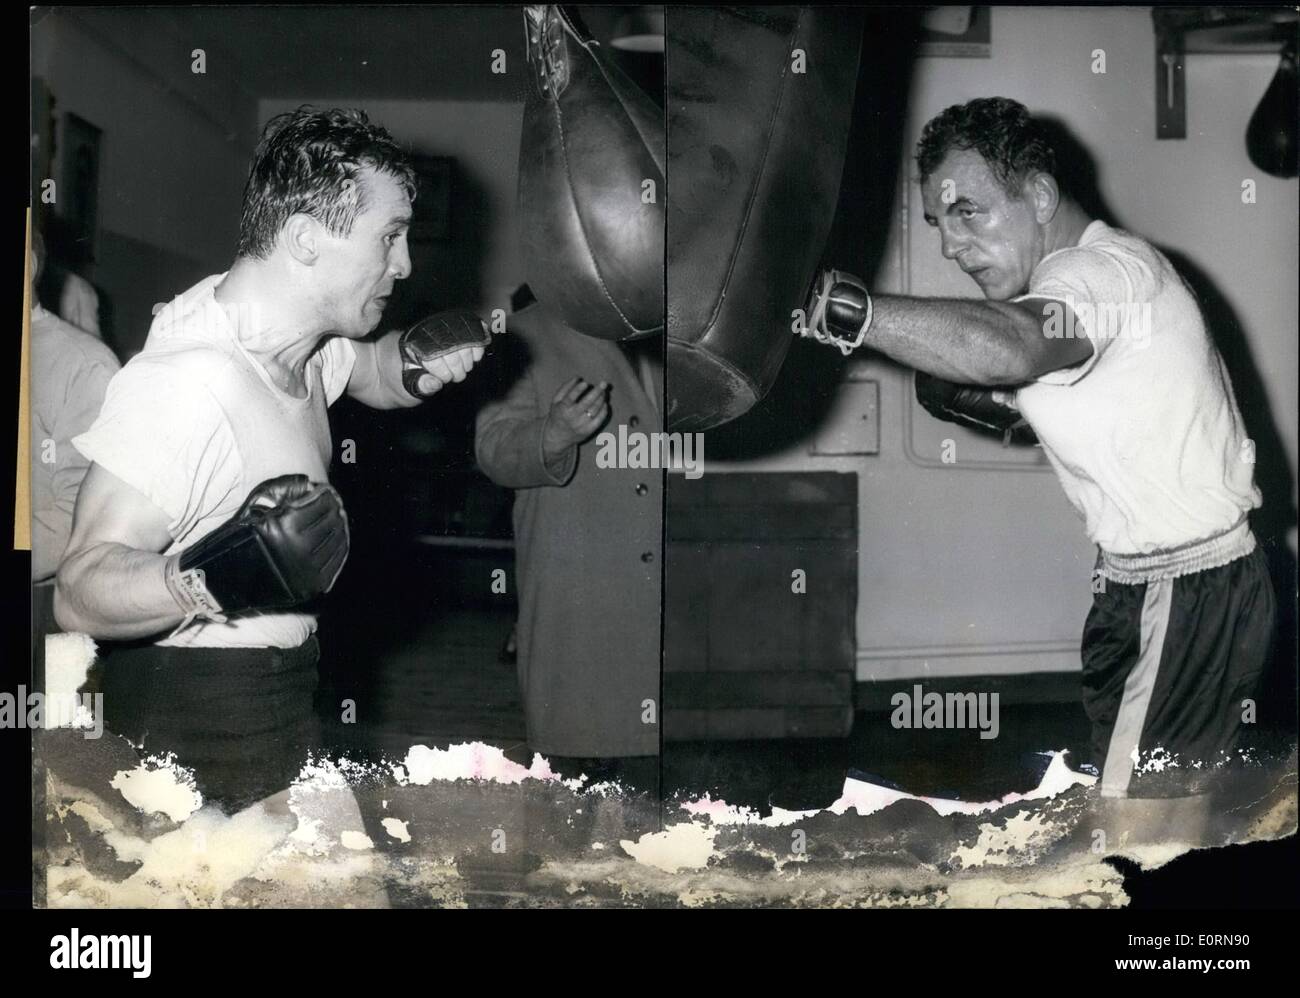 Mar. 03, 1960 - Training for the great fight was the programme on March 16th for the two main boxers of the fight on next week-end in Berlin. As known, Gustav ''Bubi'' Scholz (Gustav Scholz) and Mike Holt (Mike Holt) will fight on March 19th. Photo shows on left Bubi Sanchez and on right Mike Holt during their training in the sporting school in Berlin. Stock Photo